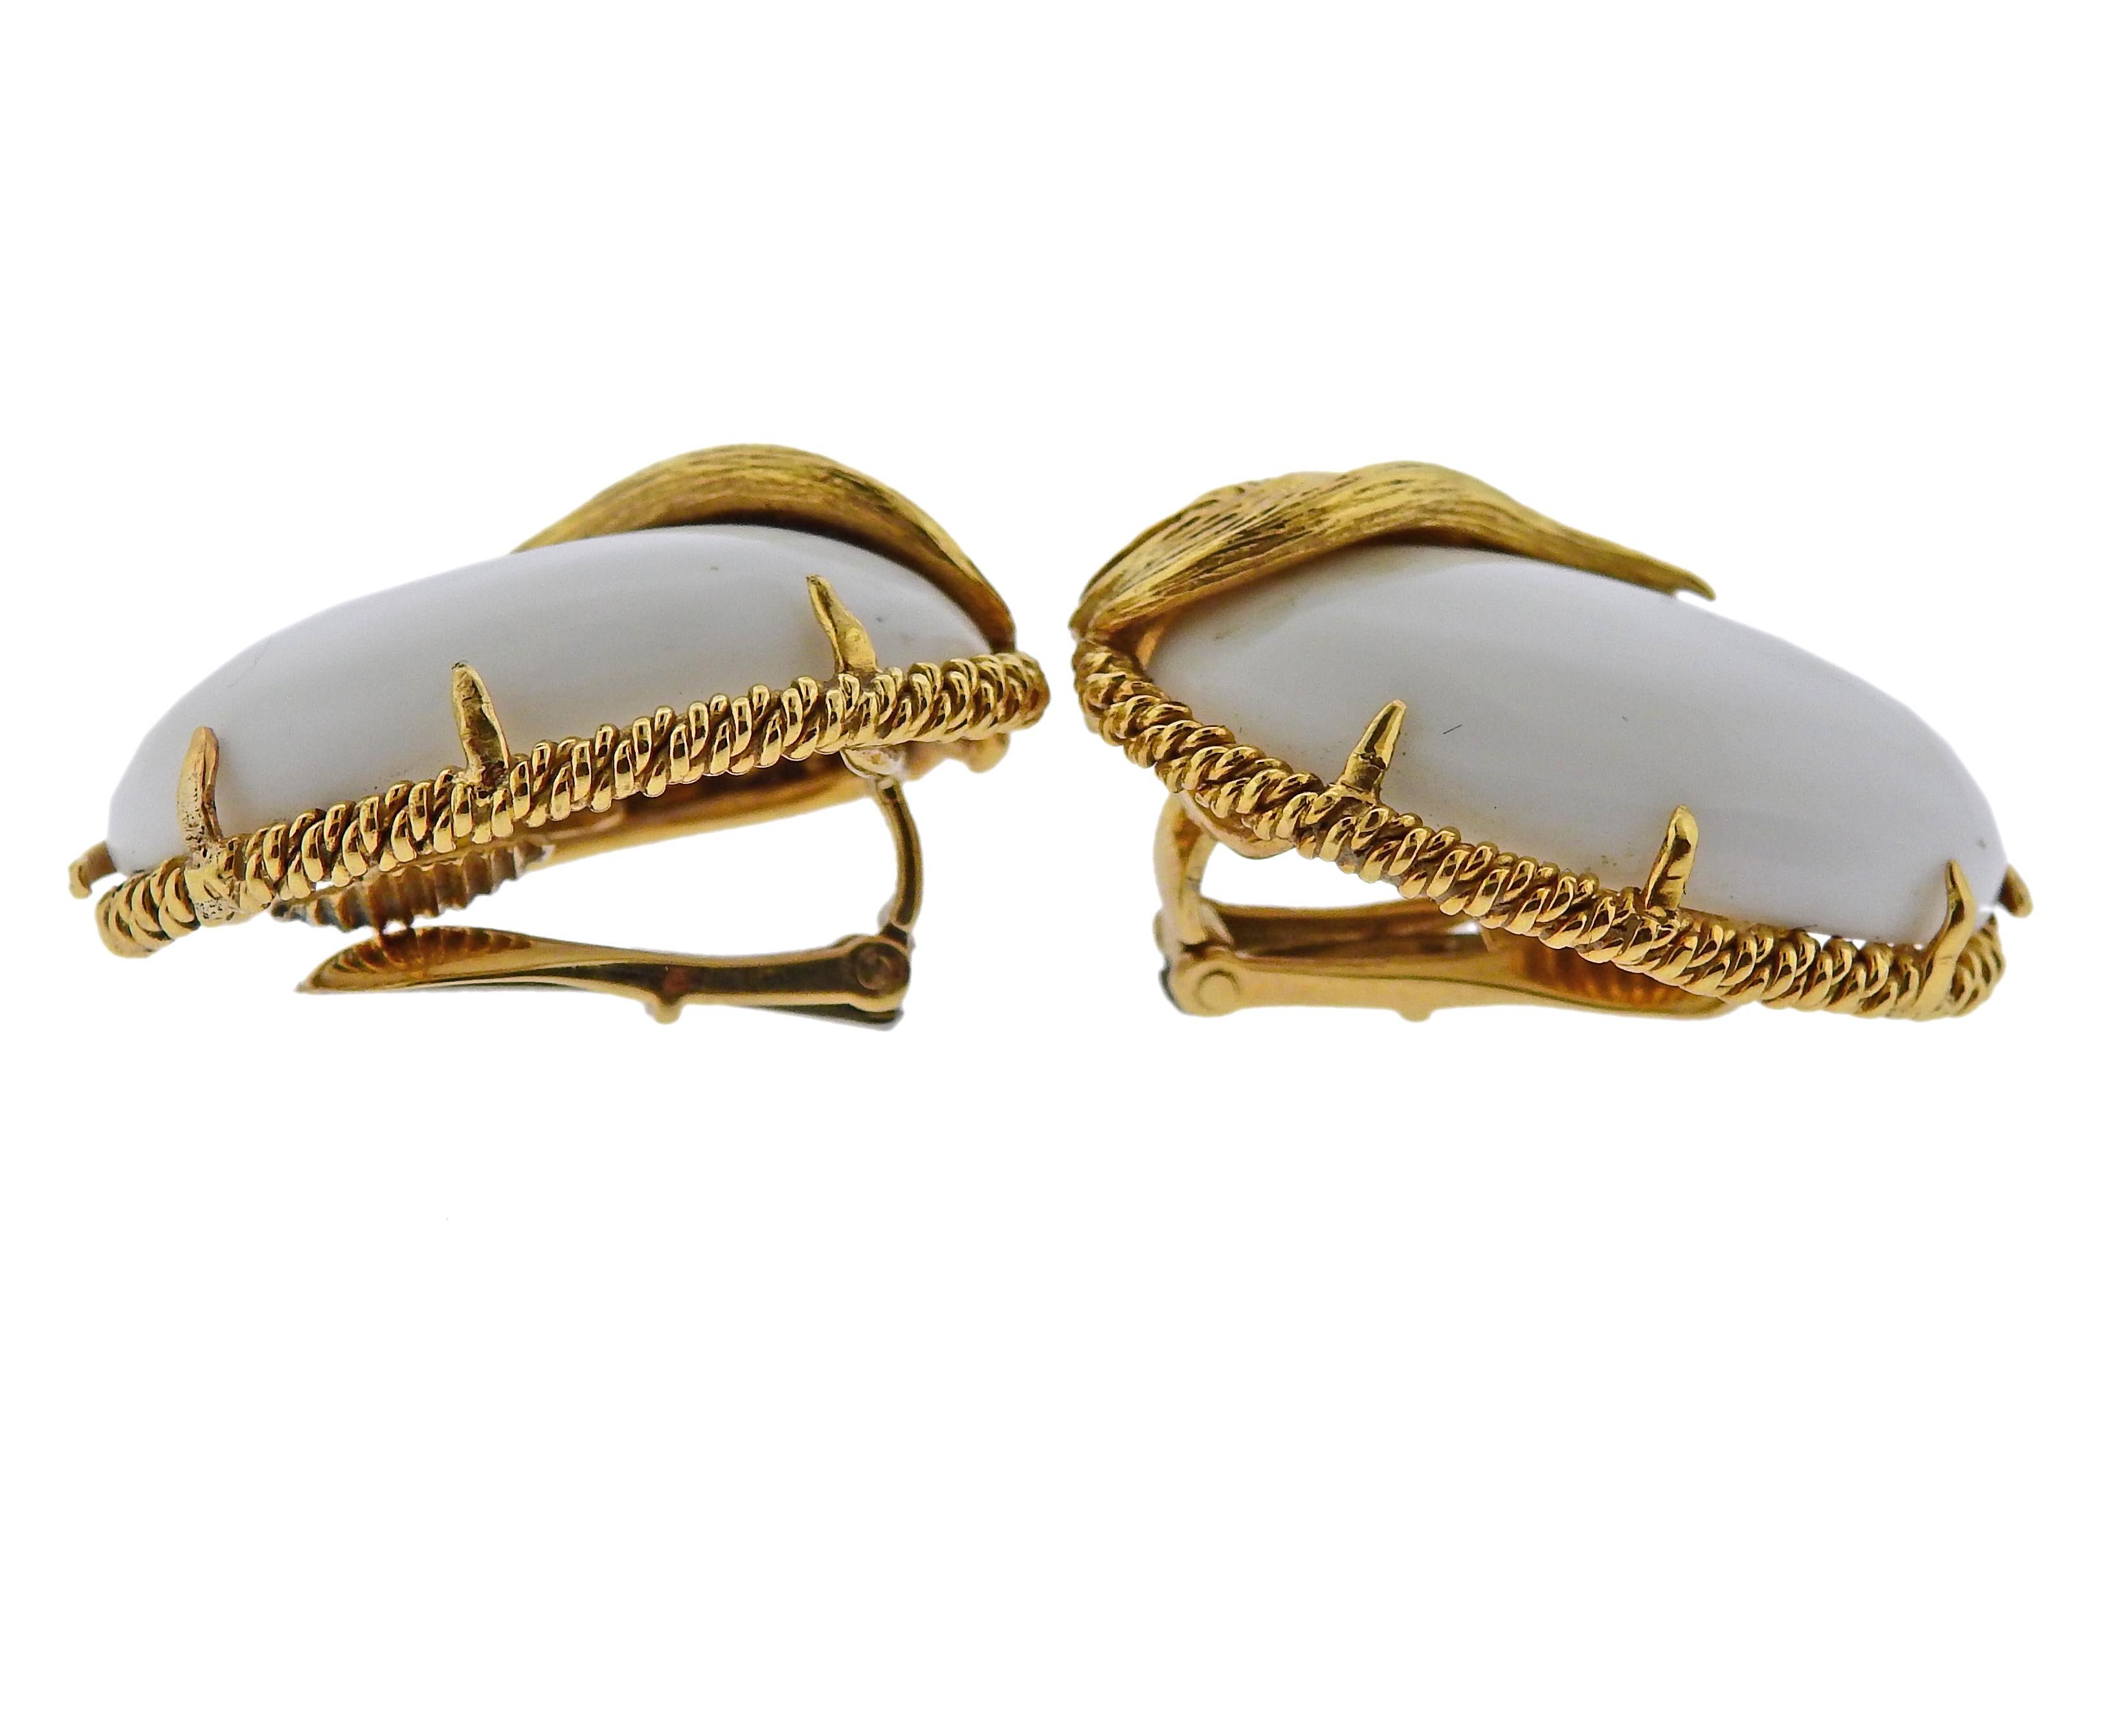 Pair of vintage 18k gold oval earrings by David Webb, set with white coral. Earrings are 28mm x 24mm. Marked Webb 18k. Weigh 25.9 grams.

SKU#E-02998